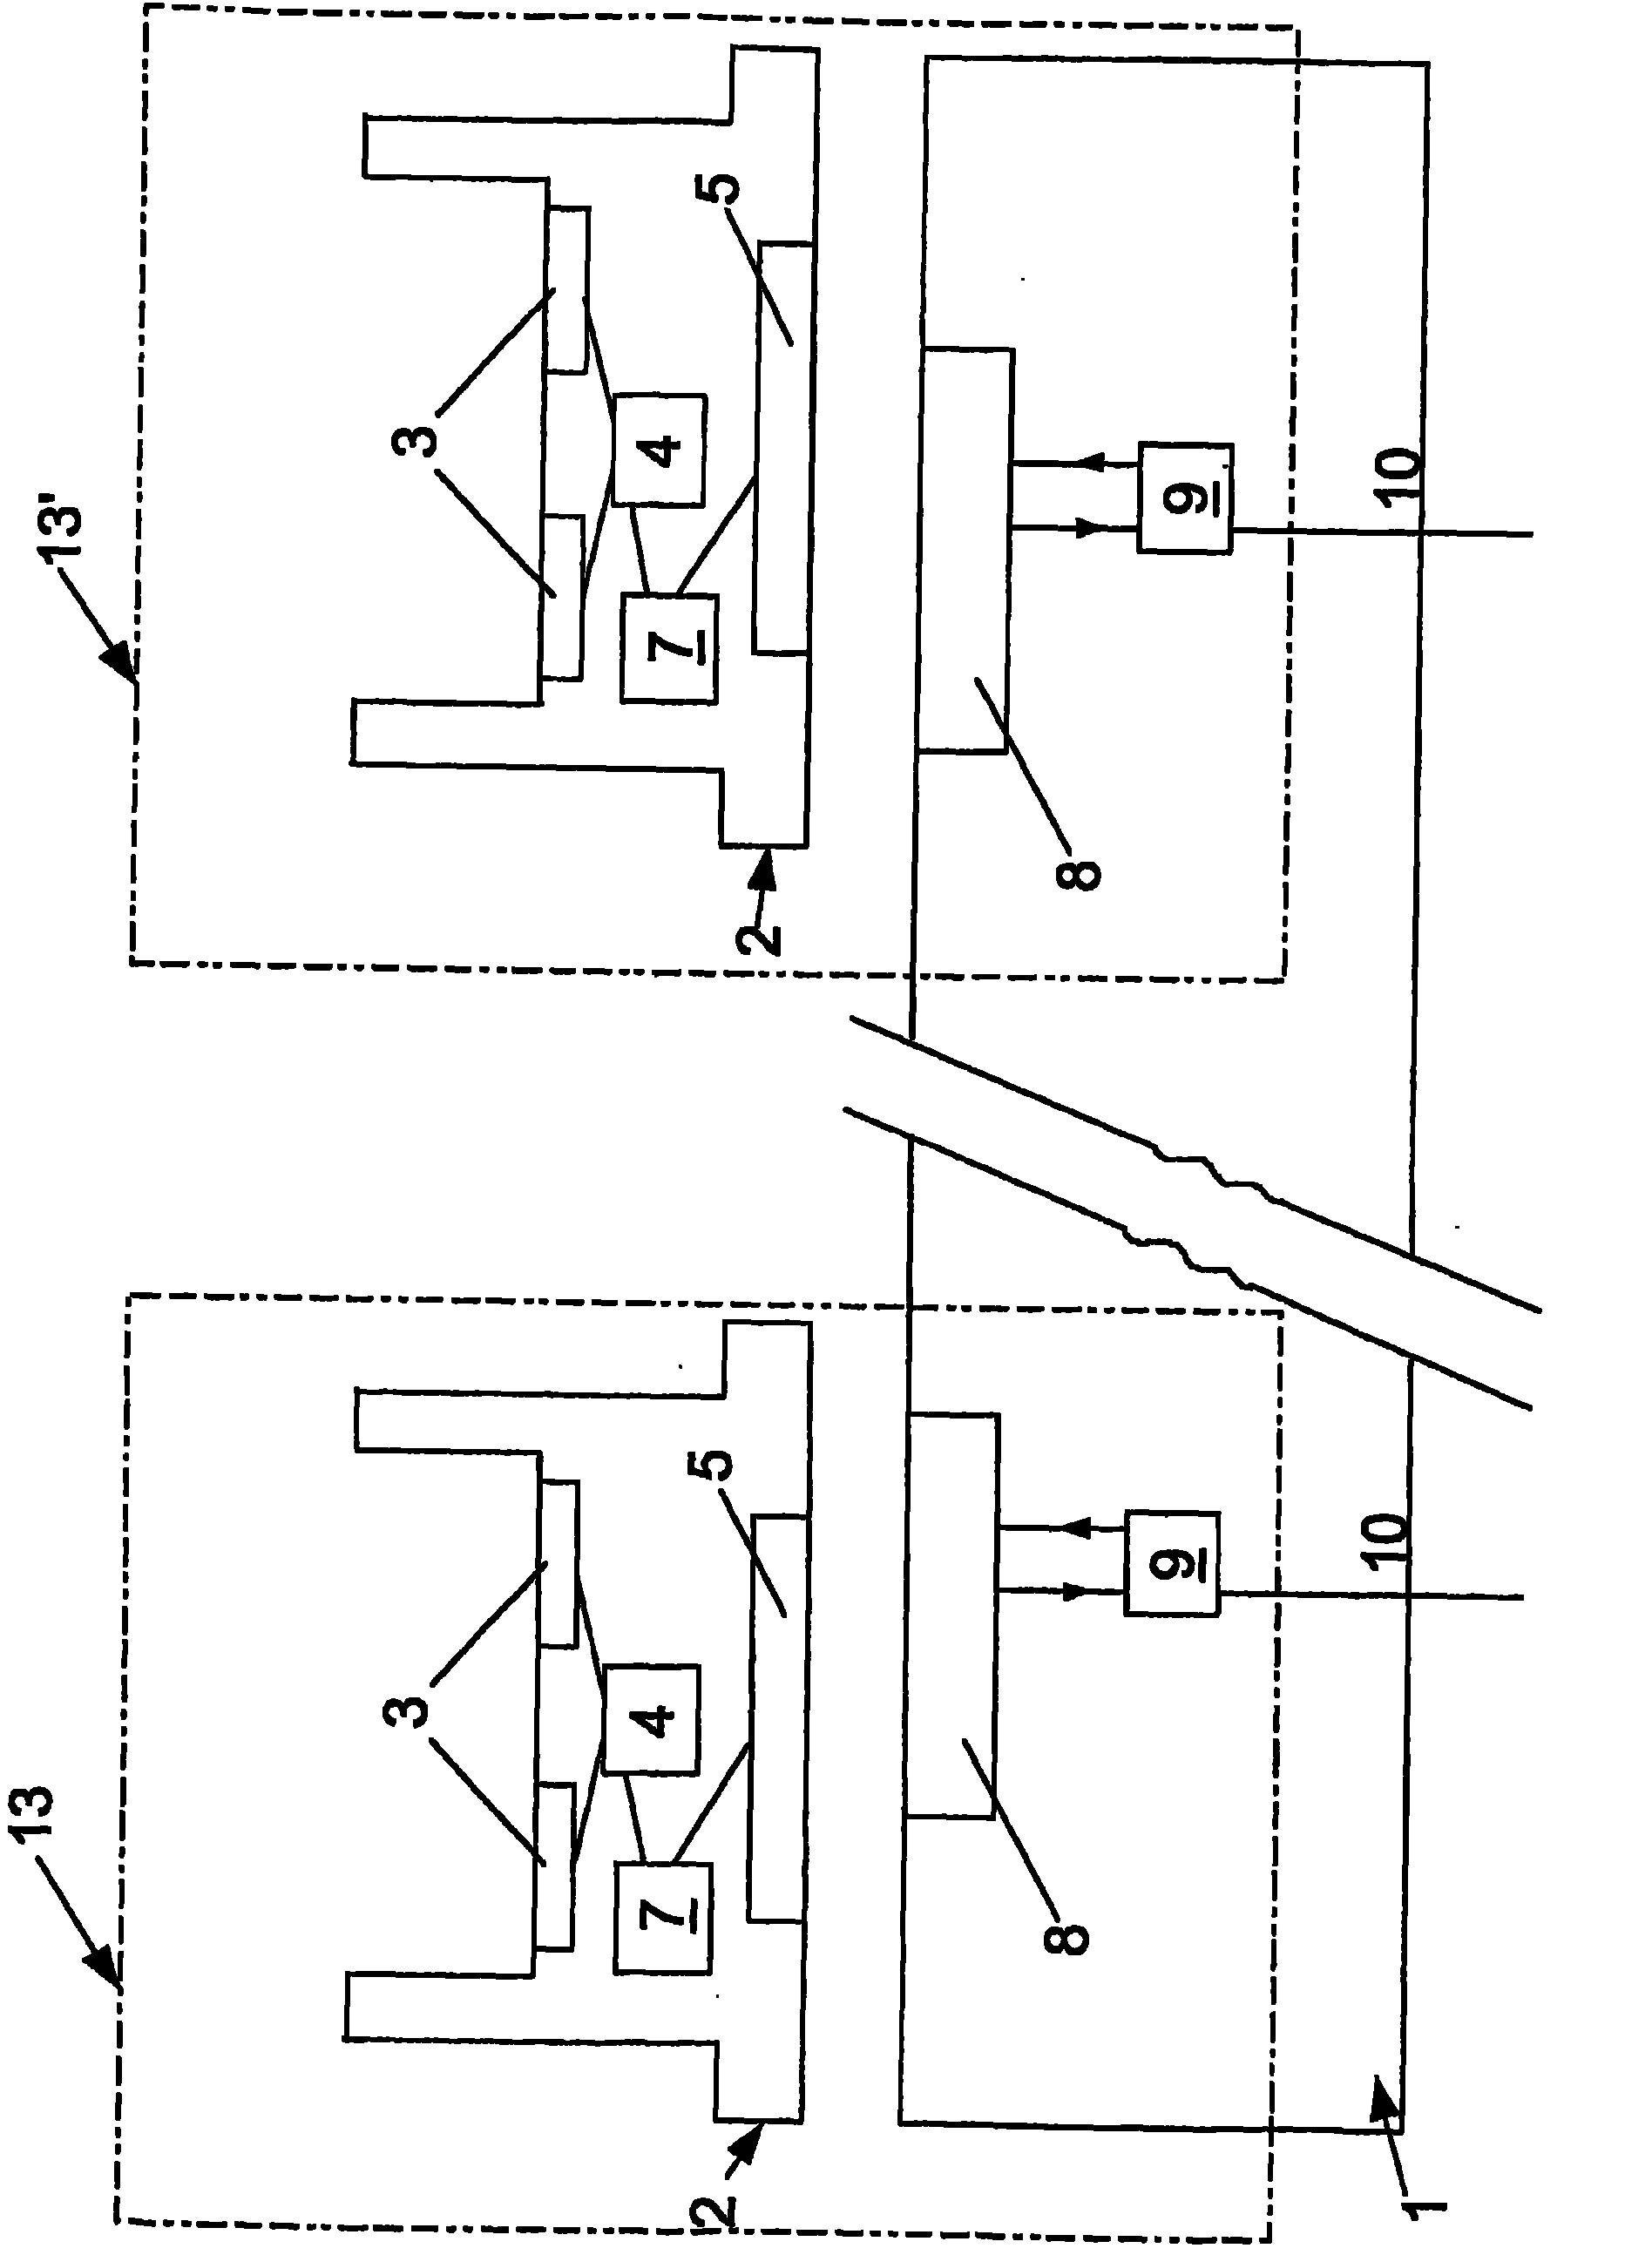 Method for wireless data transmission between a measurement module and a transmission unit